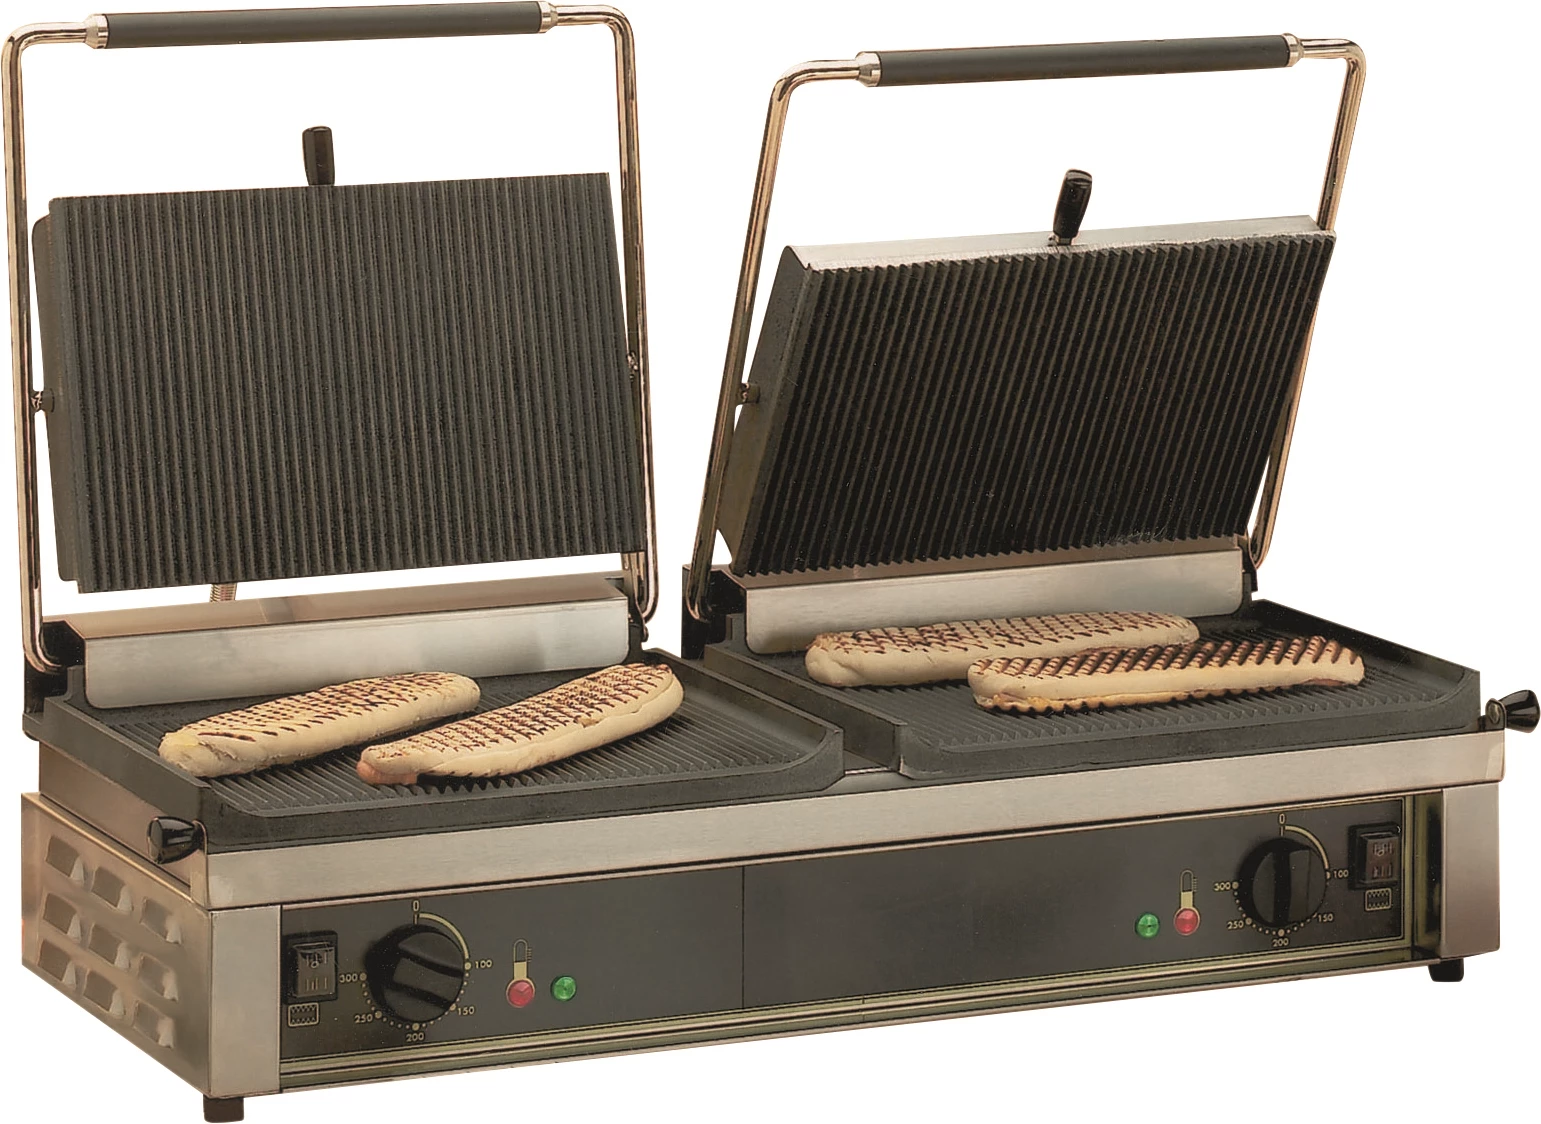 Roller Grill klemgrill, dobbelt (panini)